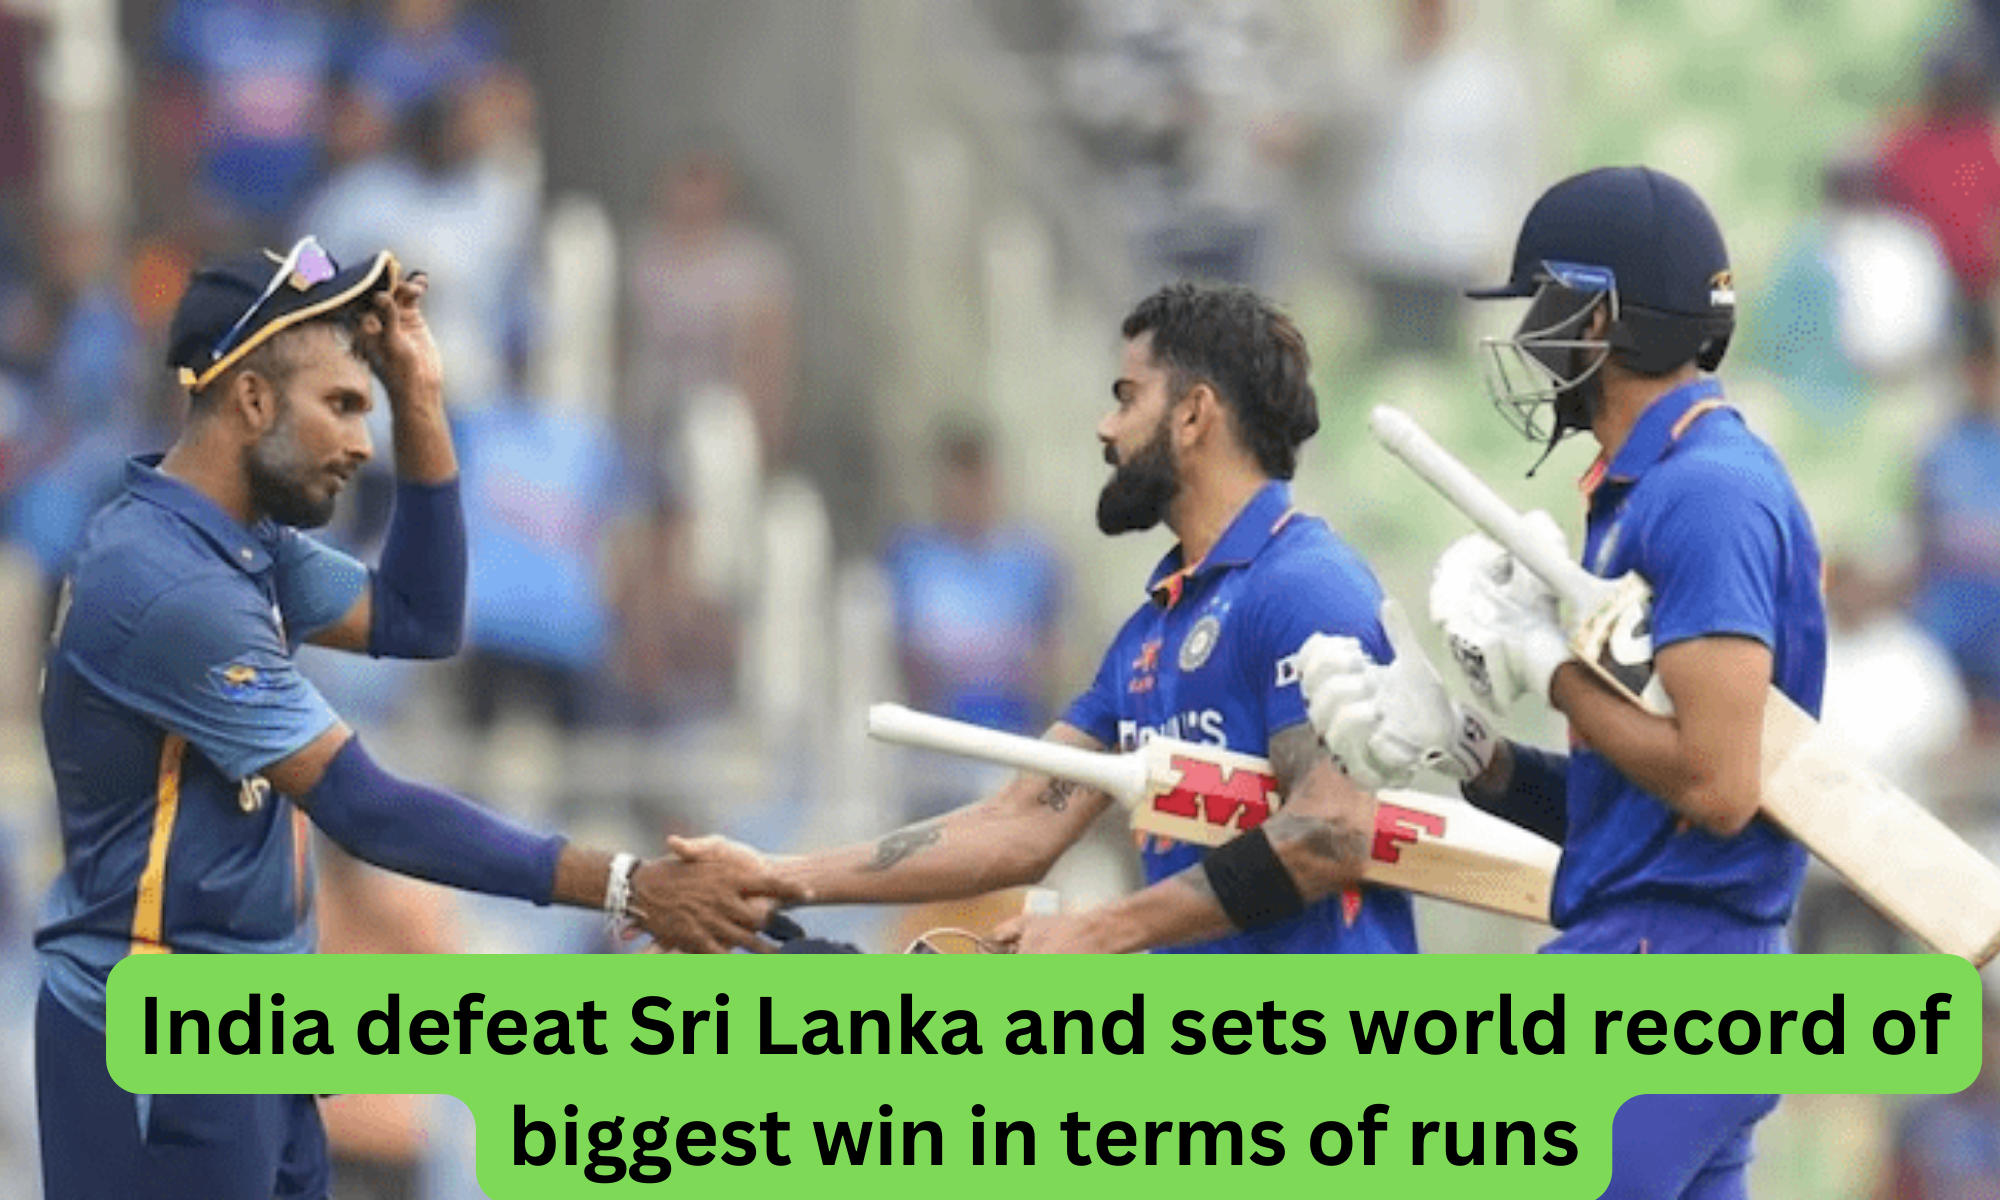 India defeat Sri Lanka and sets world record of biggest win in terms of runs